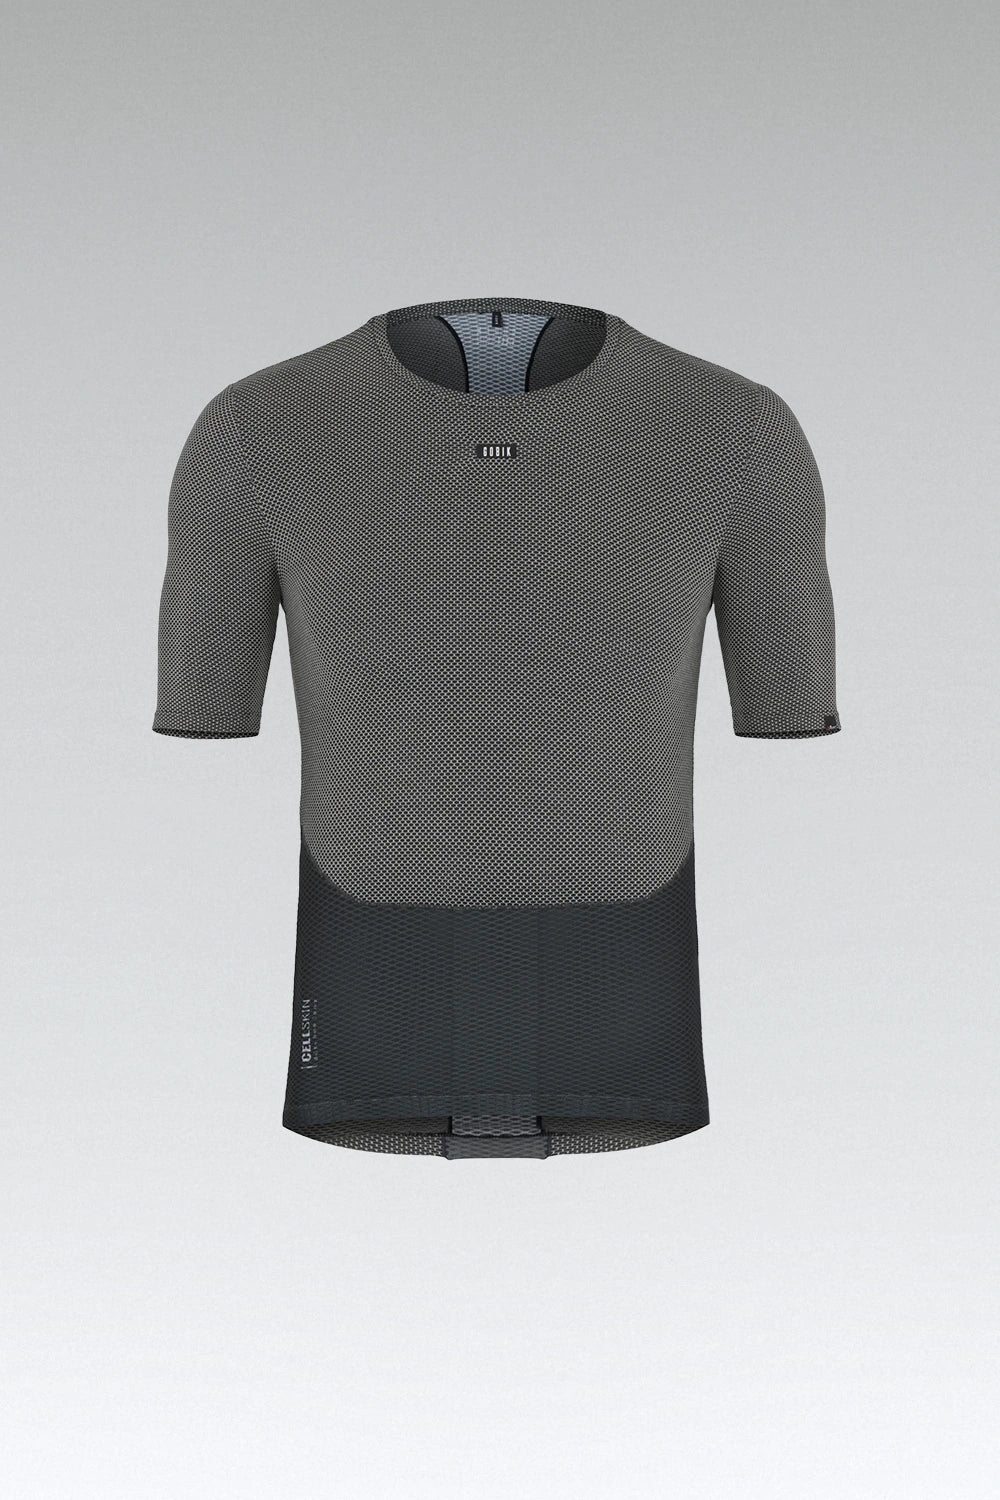 SOUS MAILLOT MANCHES COURTES CELL SKIN HOMME GREYBLACK